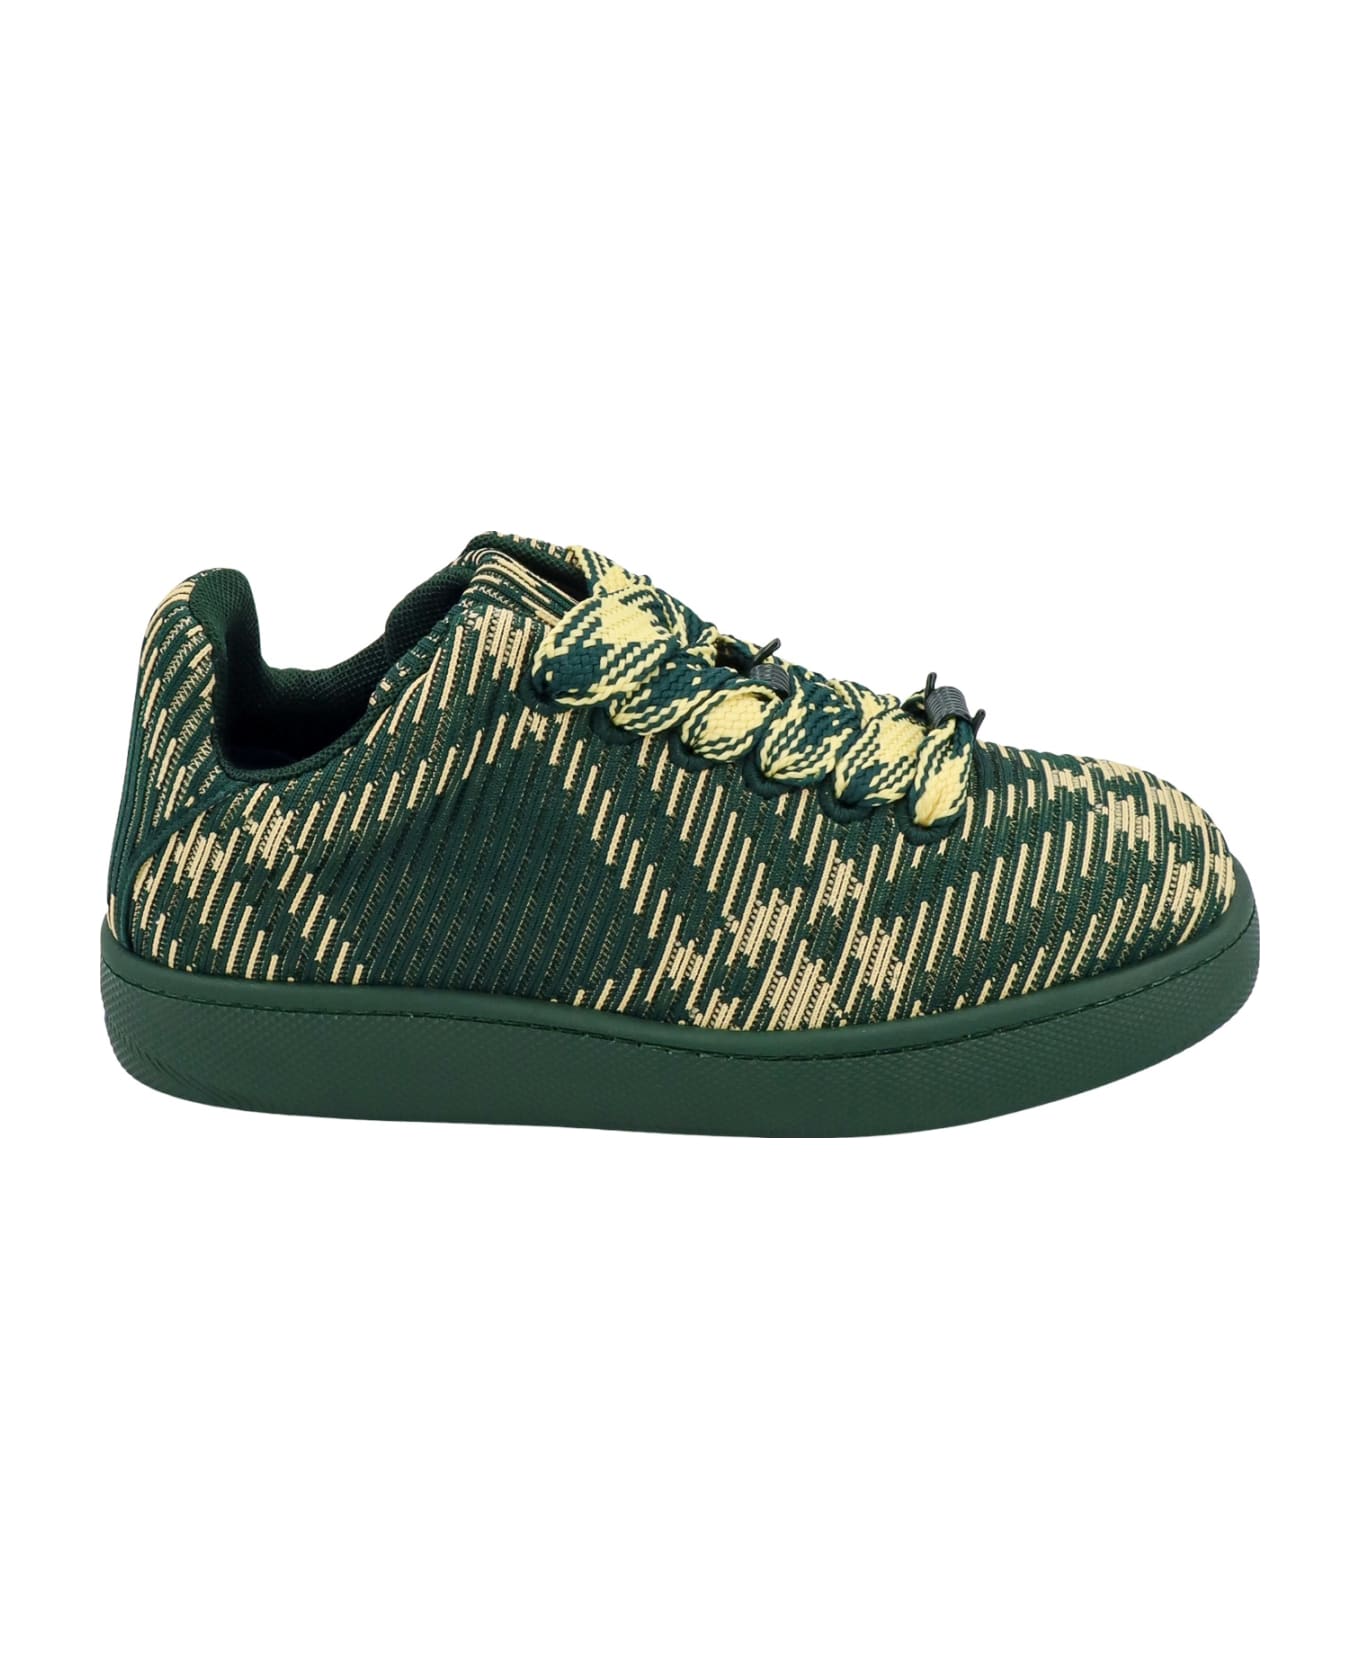 Burberry Ms18 Knit Low Top Sneakers - Primrose IP Check